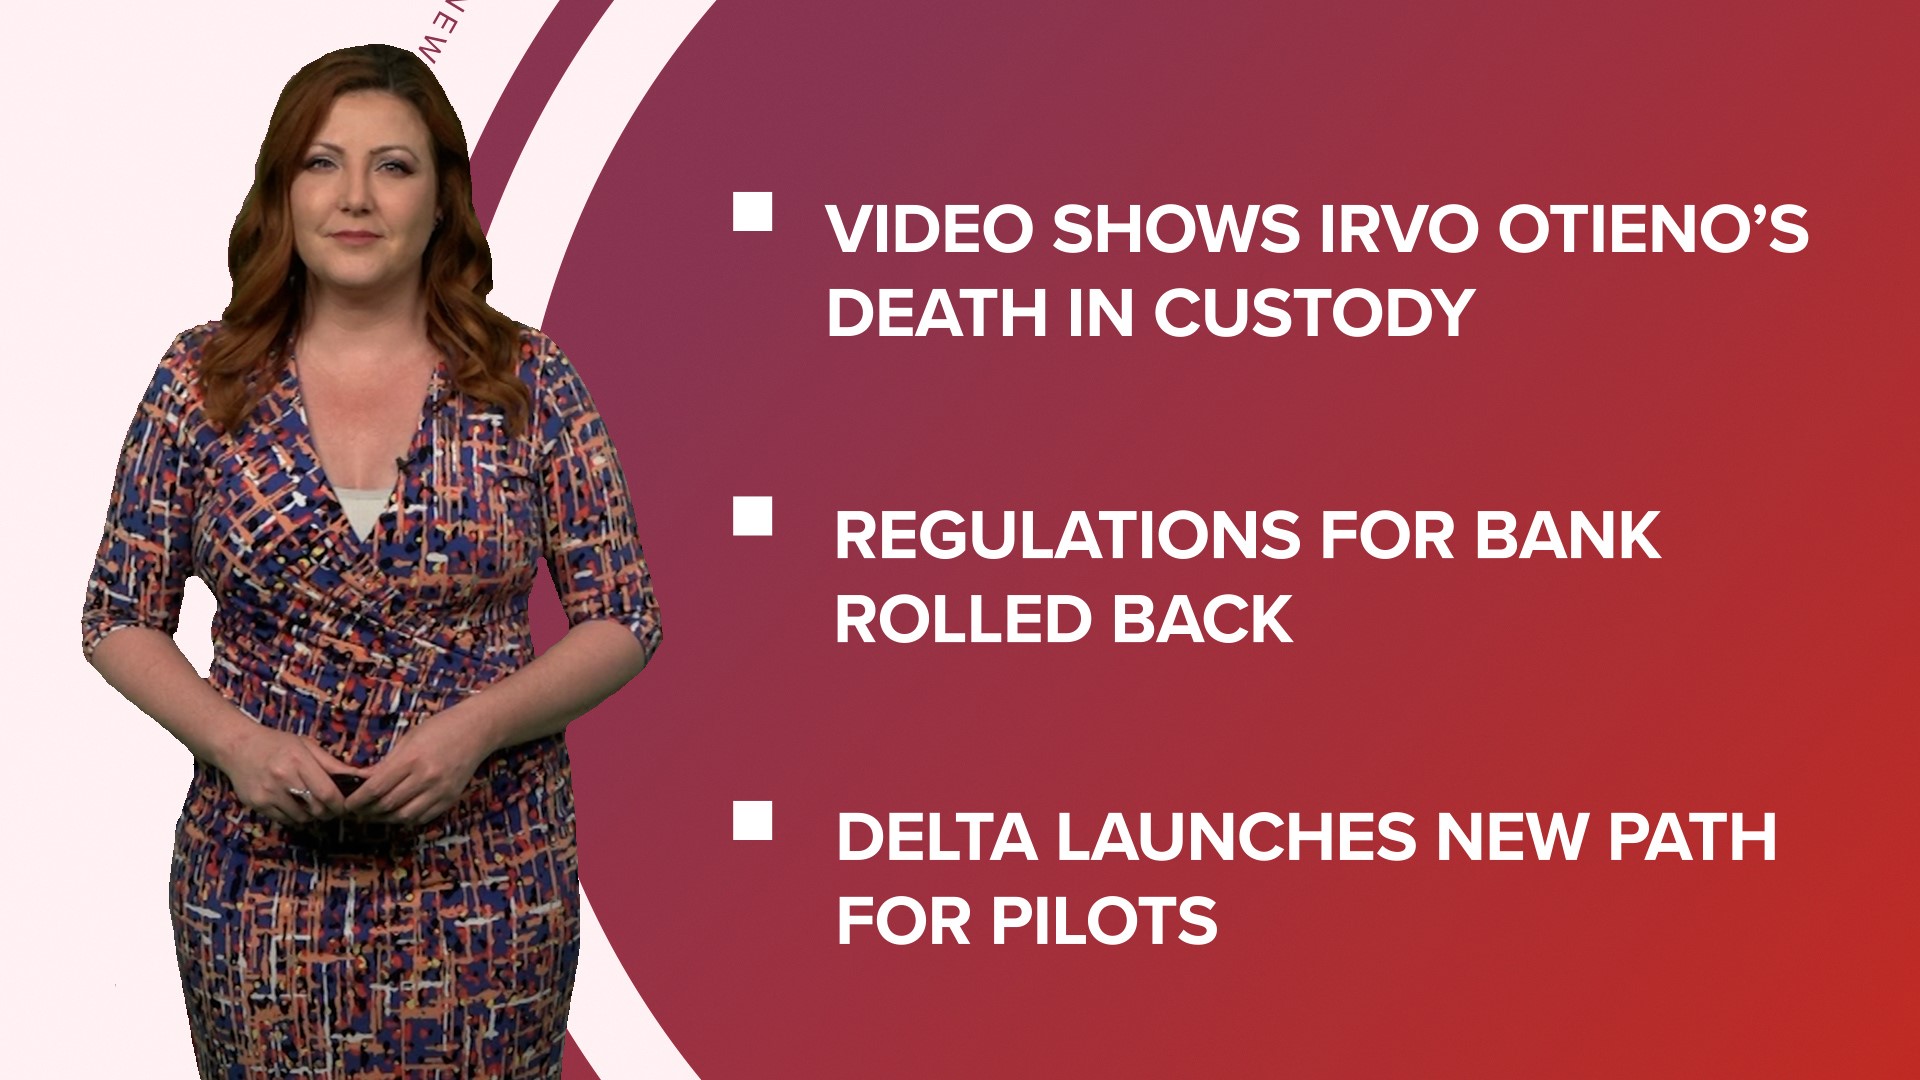 A look at what is happening in the news from new video released in the death of Irvo Otieno to Delta training new pilots.